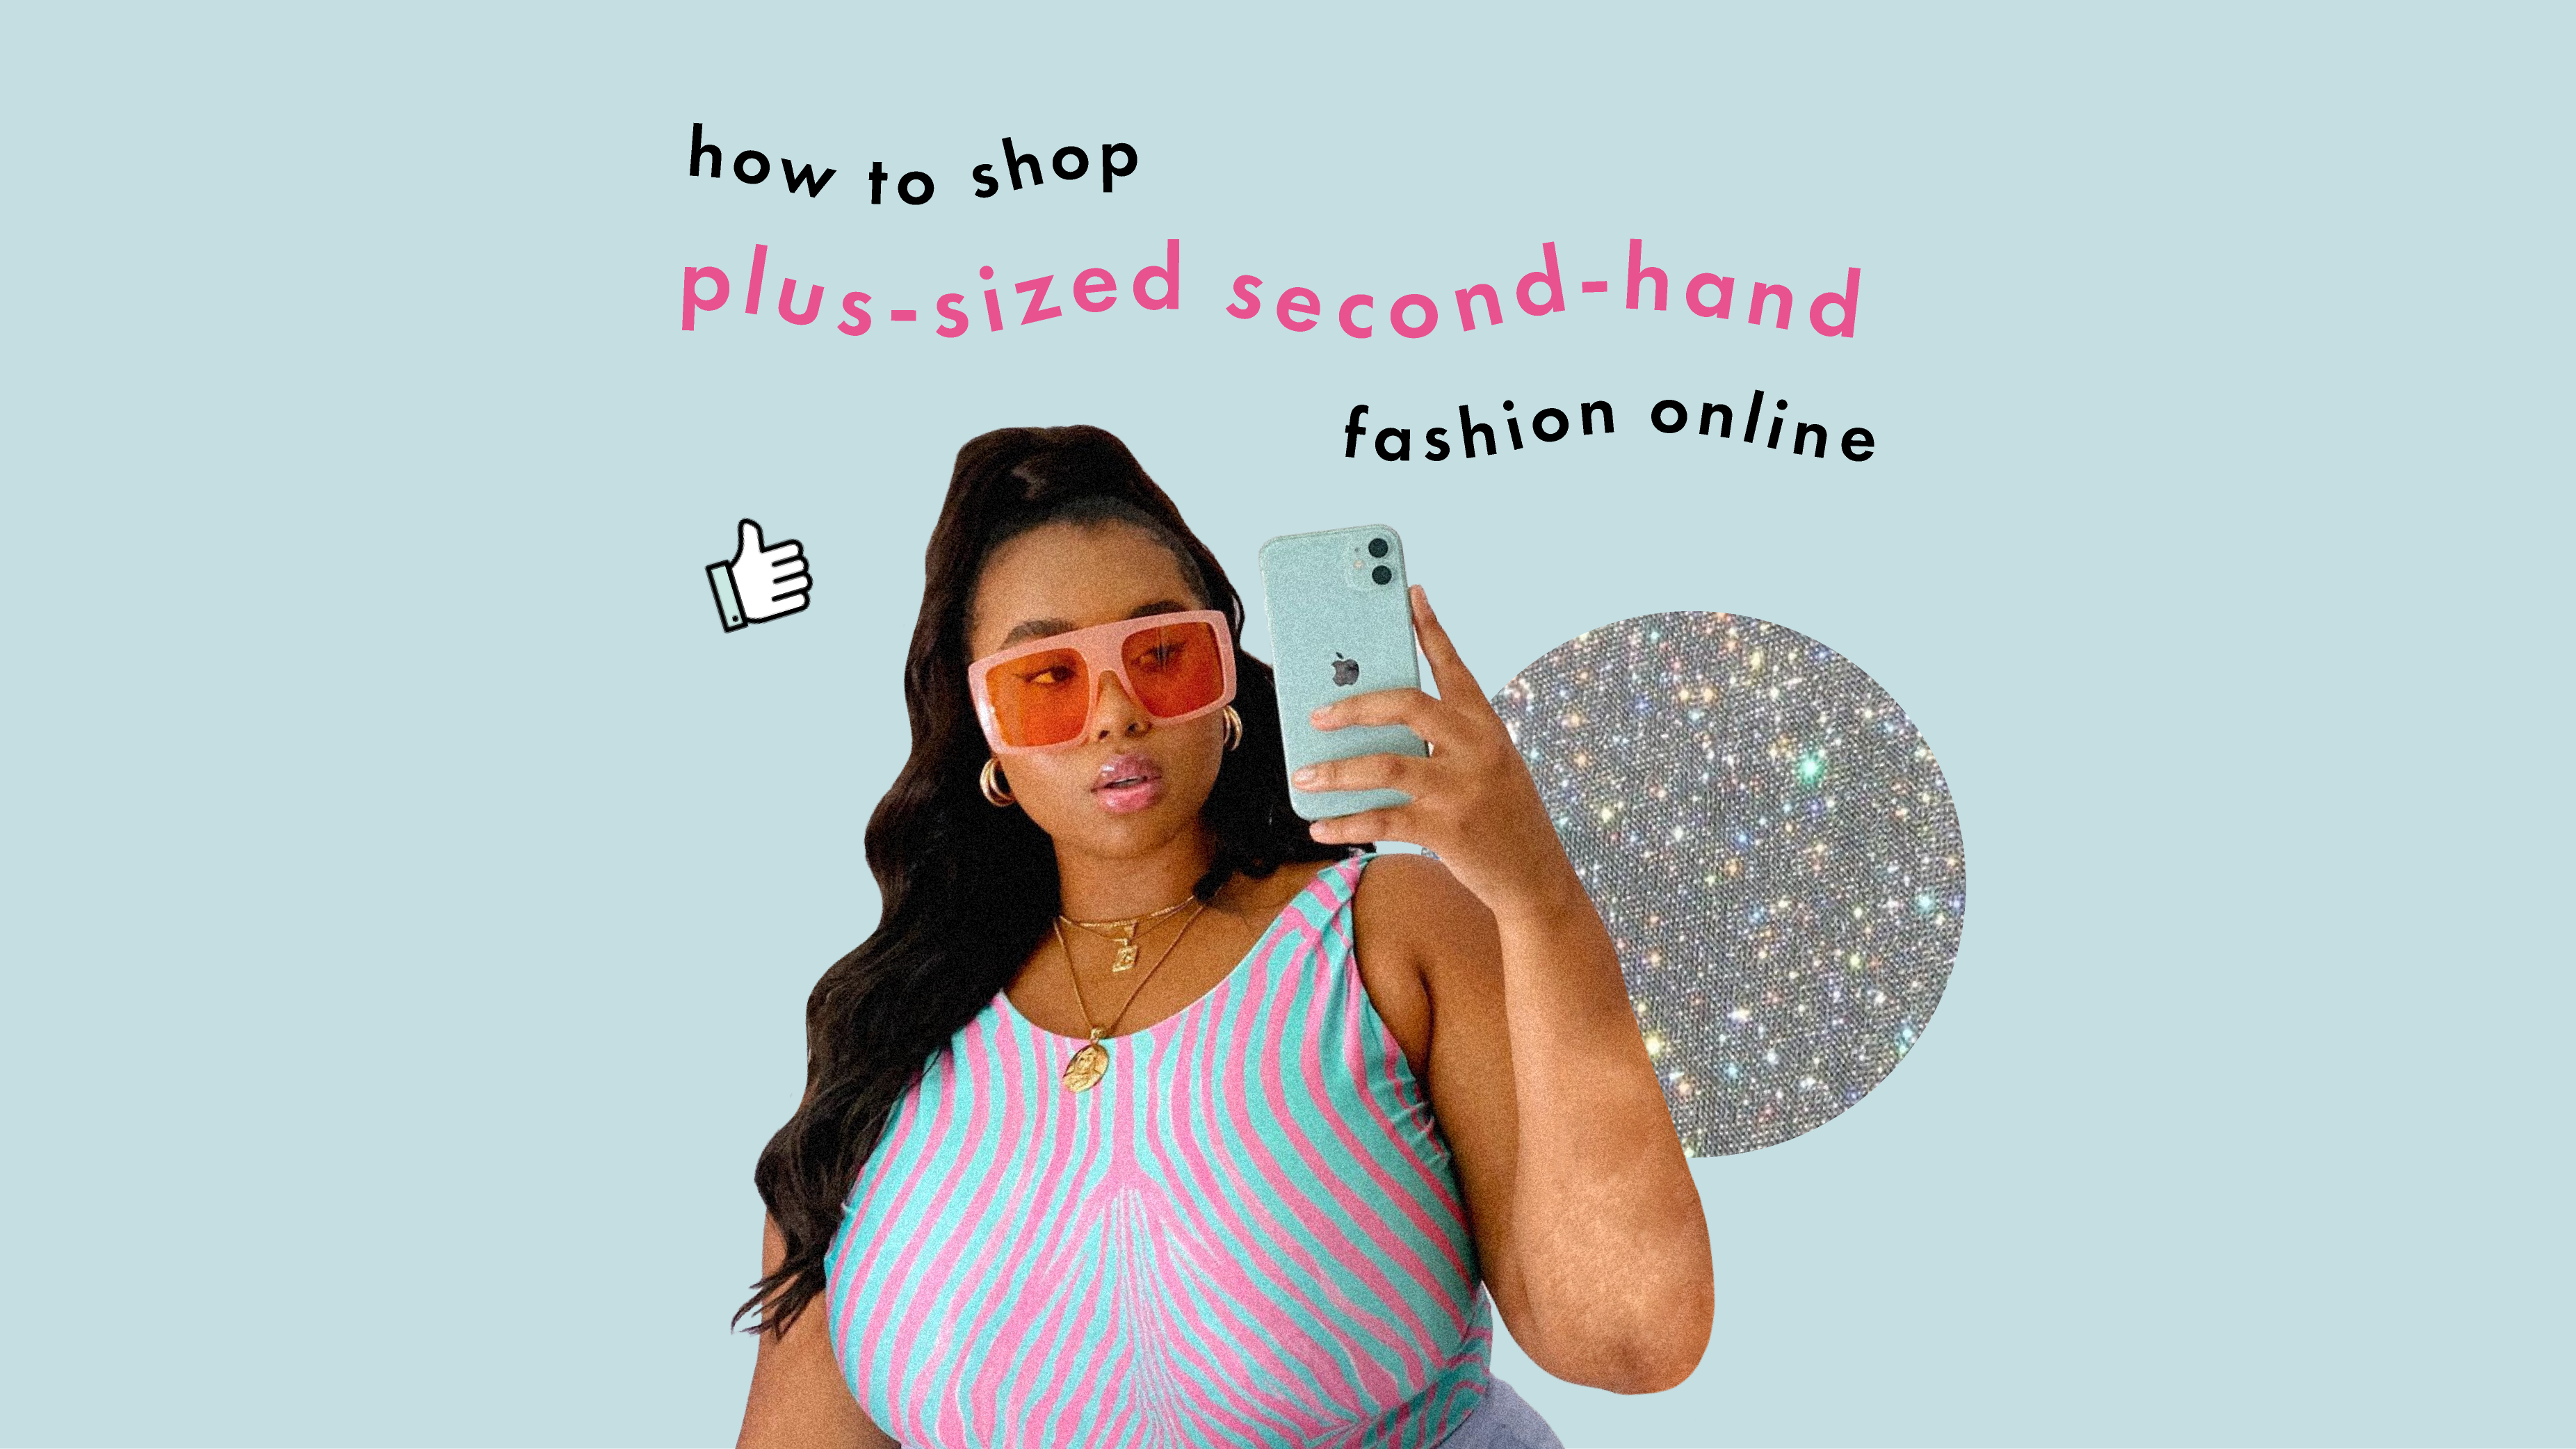 6 tips shopping plus-size second-hand online